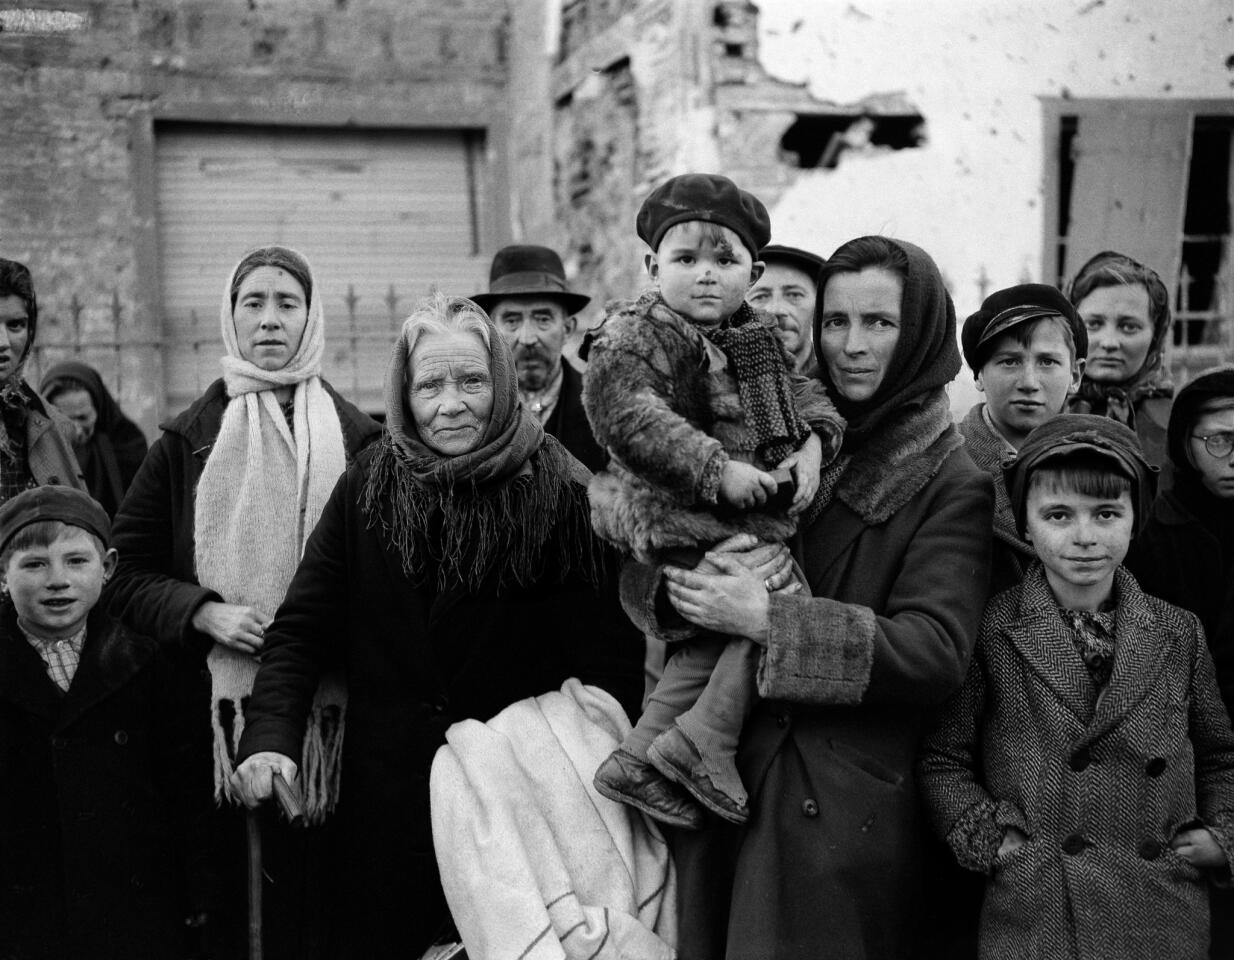 Grim-faced refugees stand in a group on a street in La Gleize, Belgium, on Jan. 2, 1945. They are waiting to be transported from the war-torn town after its recapture by American forces during the German thrust into Belgium.